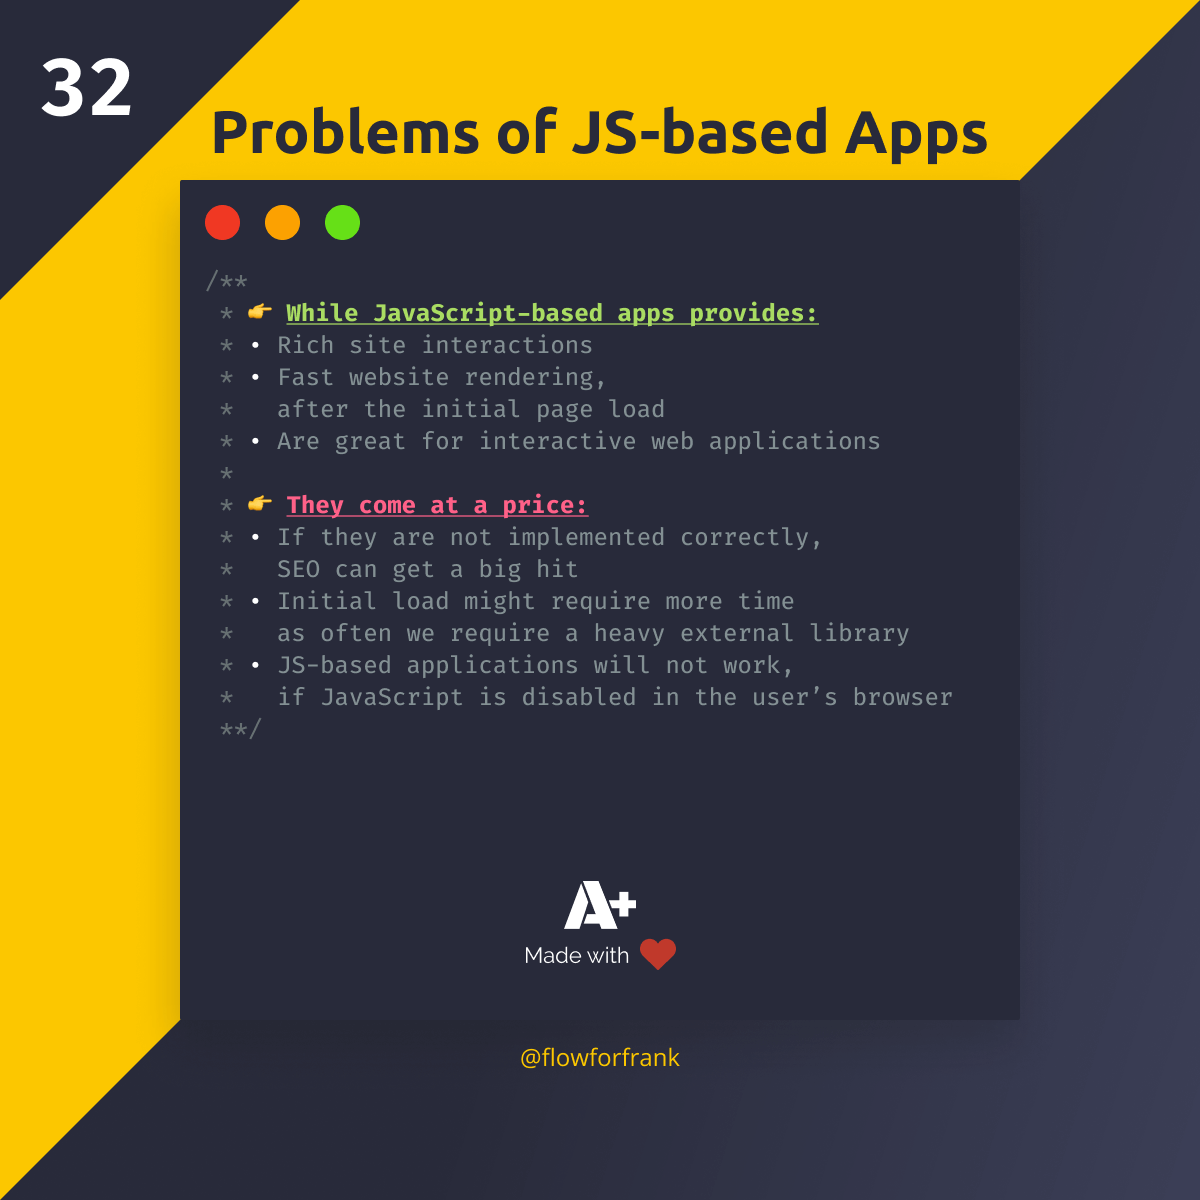 What are the problems with JavaScript-based applications?